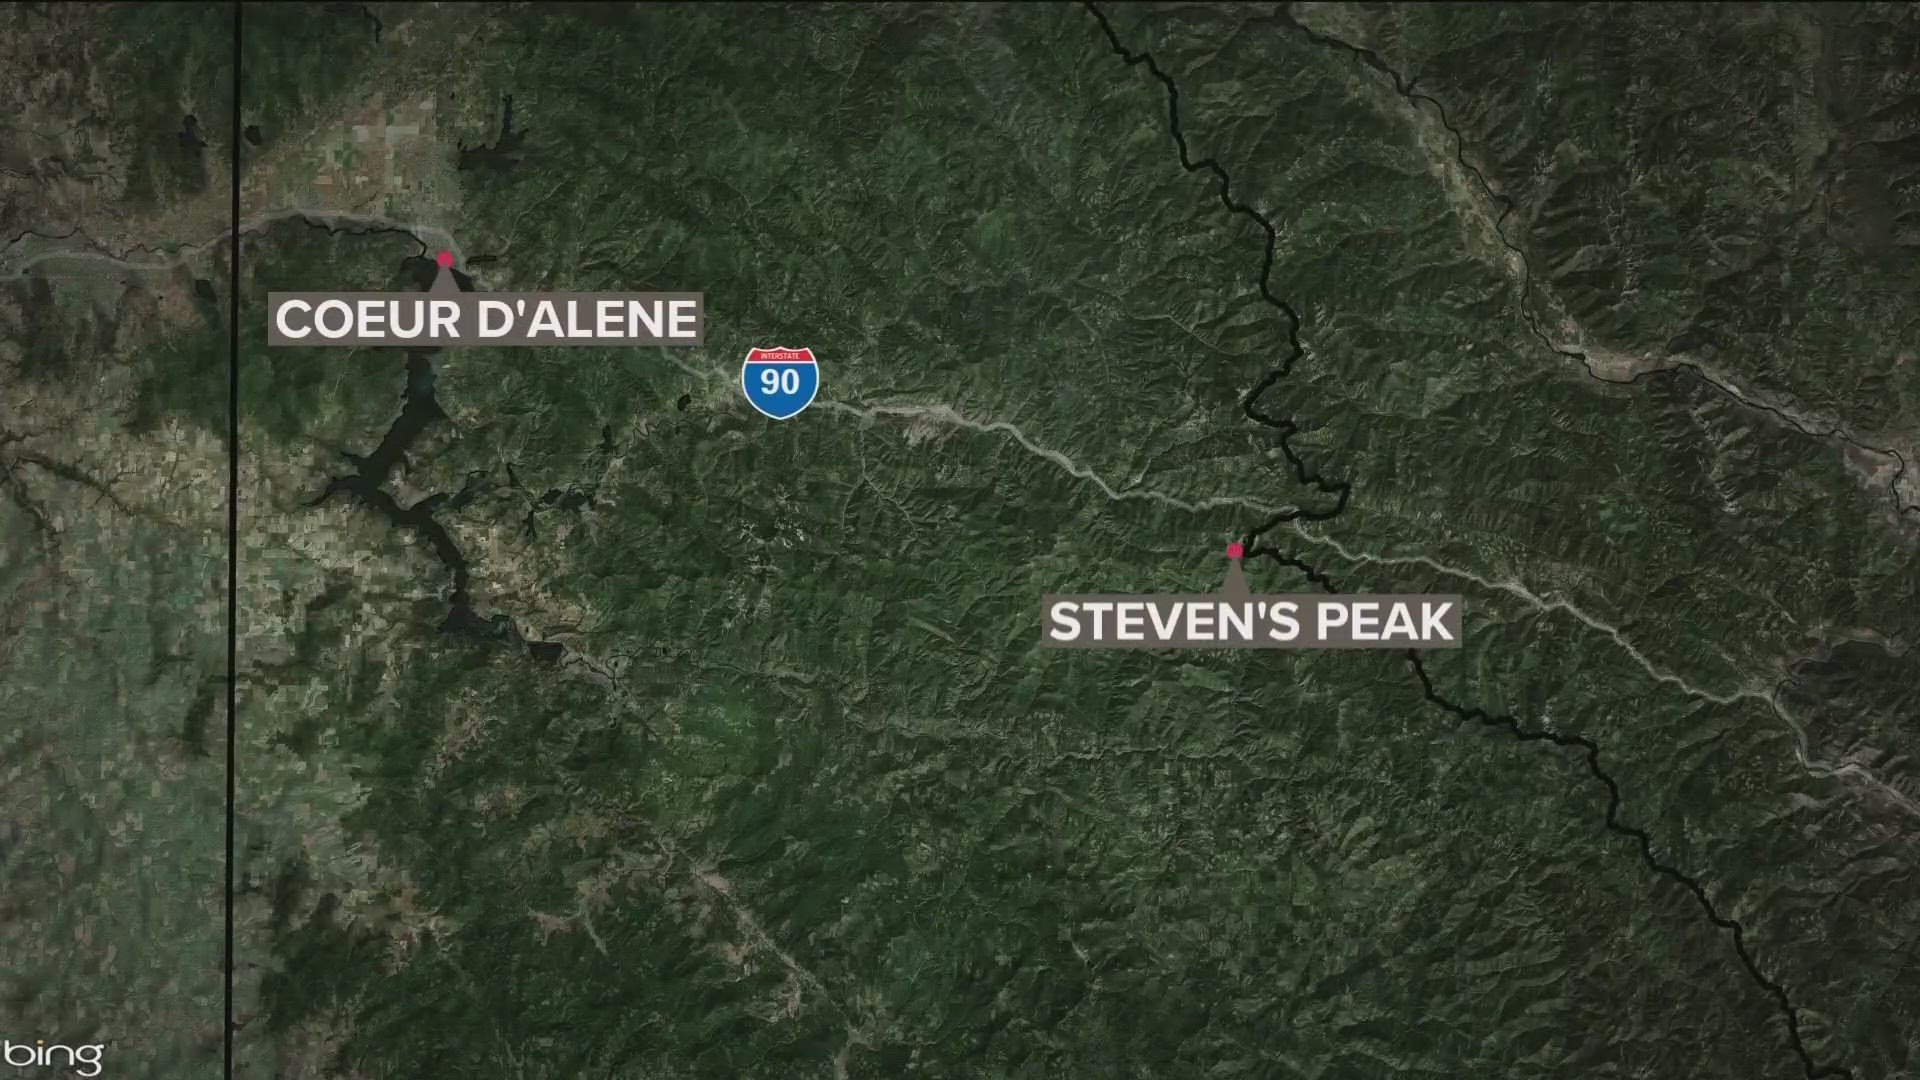 At this time, the names of the three men caught in the avalanche have been released by the Shoshone County Sheriff's Office.